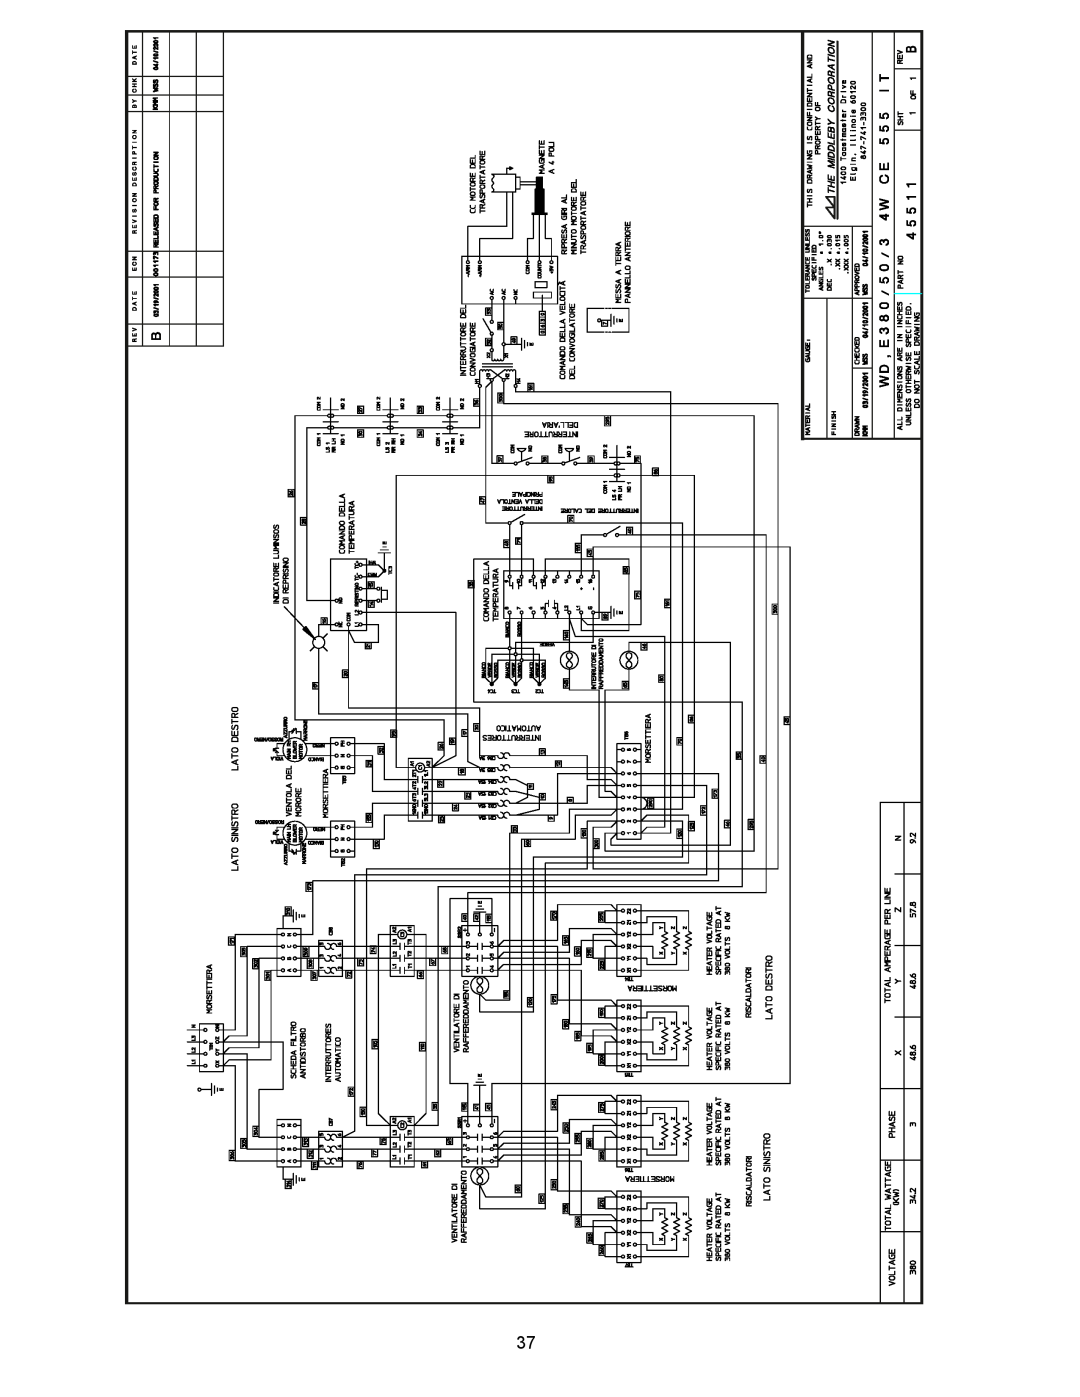 Middleby Marshall PS555 manual WIRING DIAGRAM IT CE 380V 3-PHASE 3745511B 